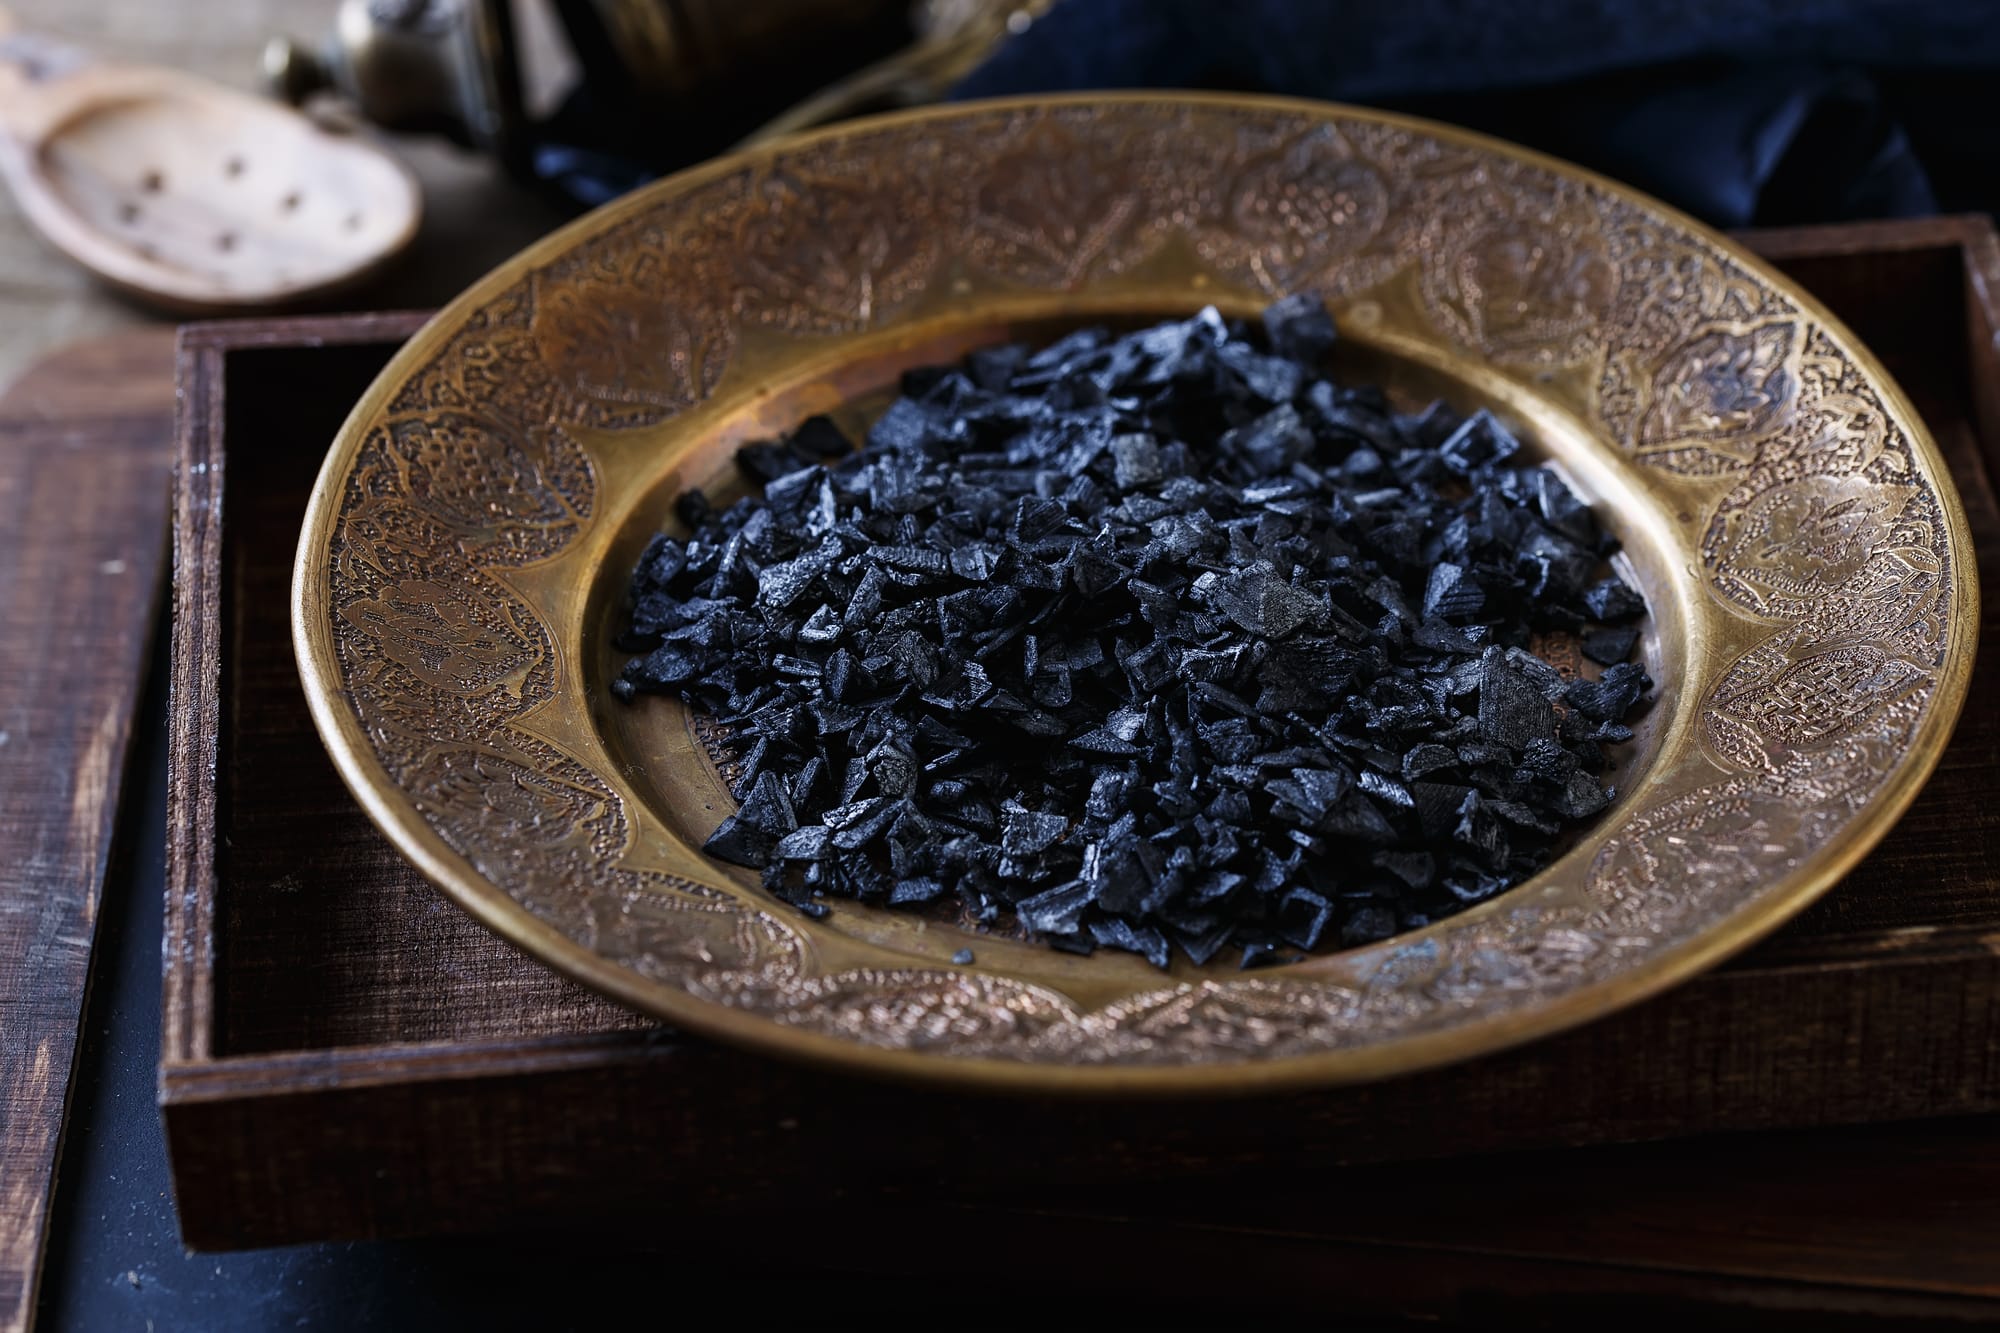 How Do You Make Black Salt Used for Spiritual Cleansing and Protection?